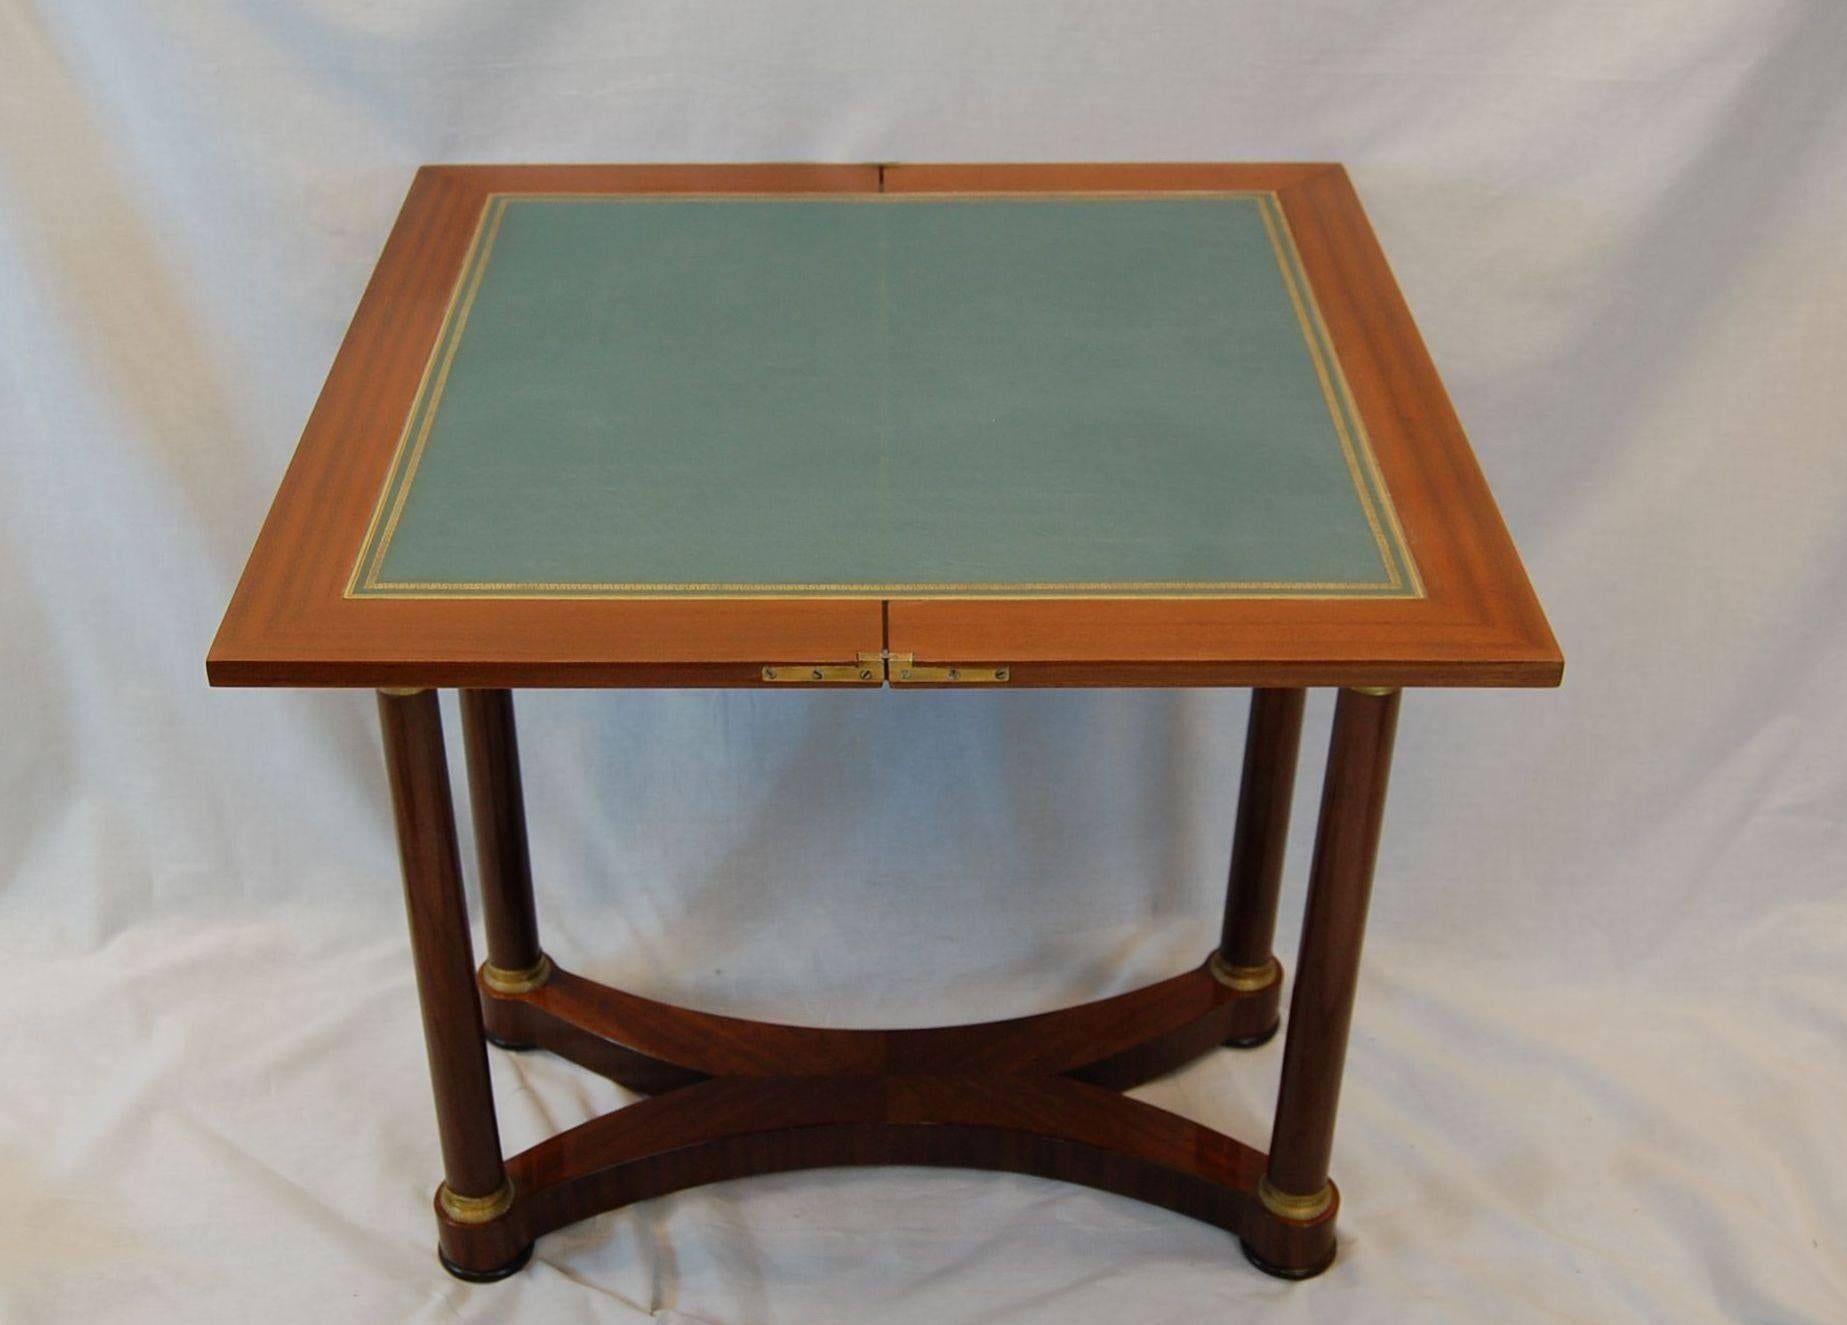 Beautiful mahogany flip-top games table with bright gold doré bronze ormolu top and bottom of the columns. Newer blue leather insert with gold tooled line. The top when in the open position is 30.5